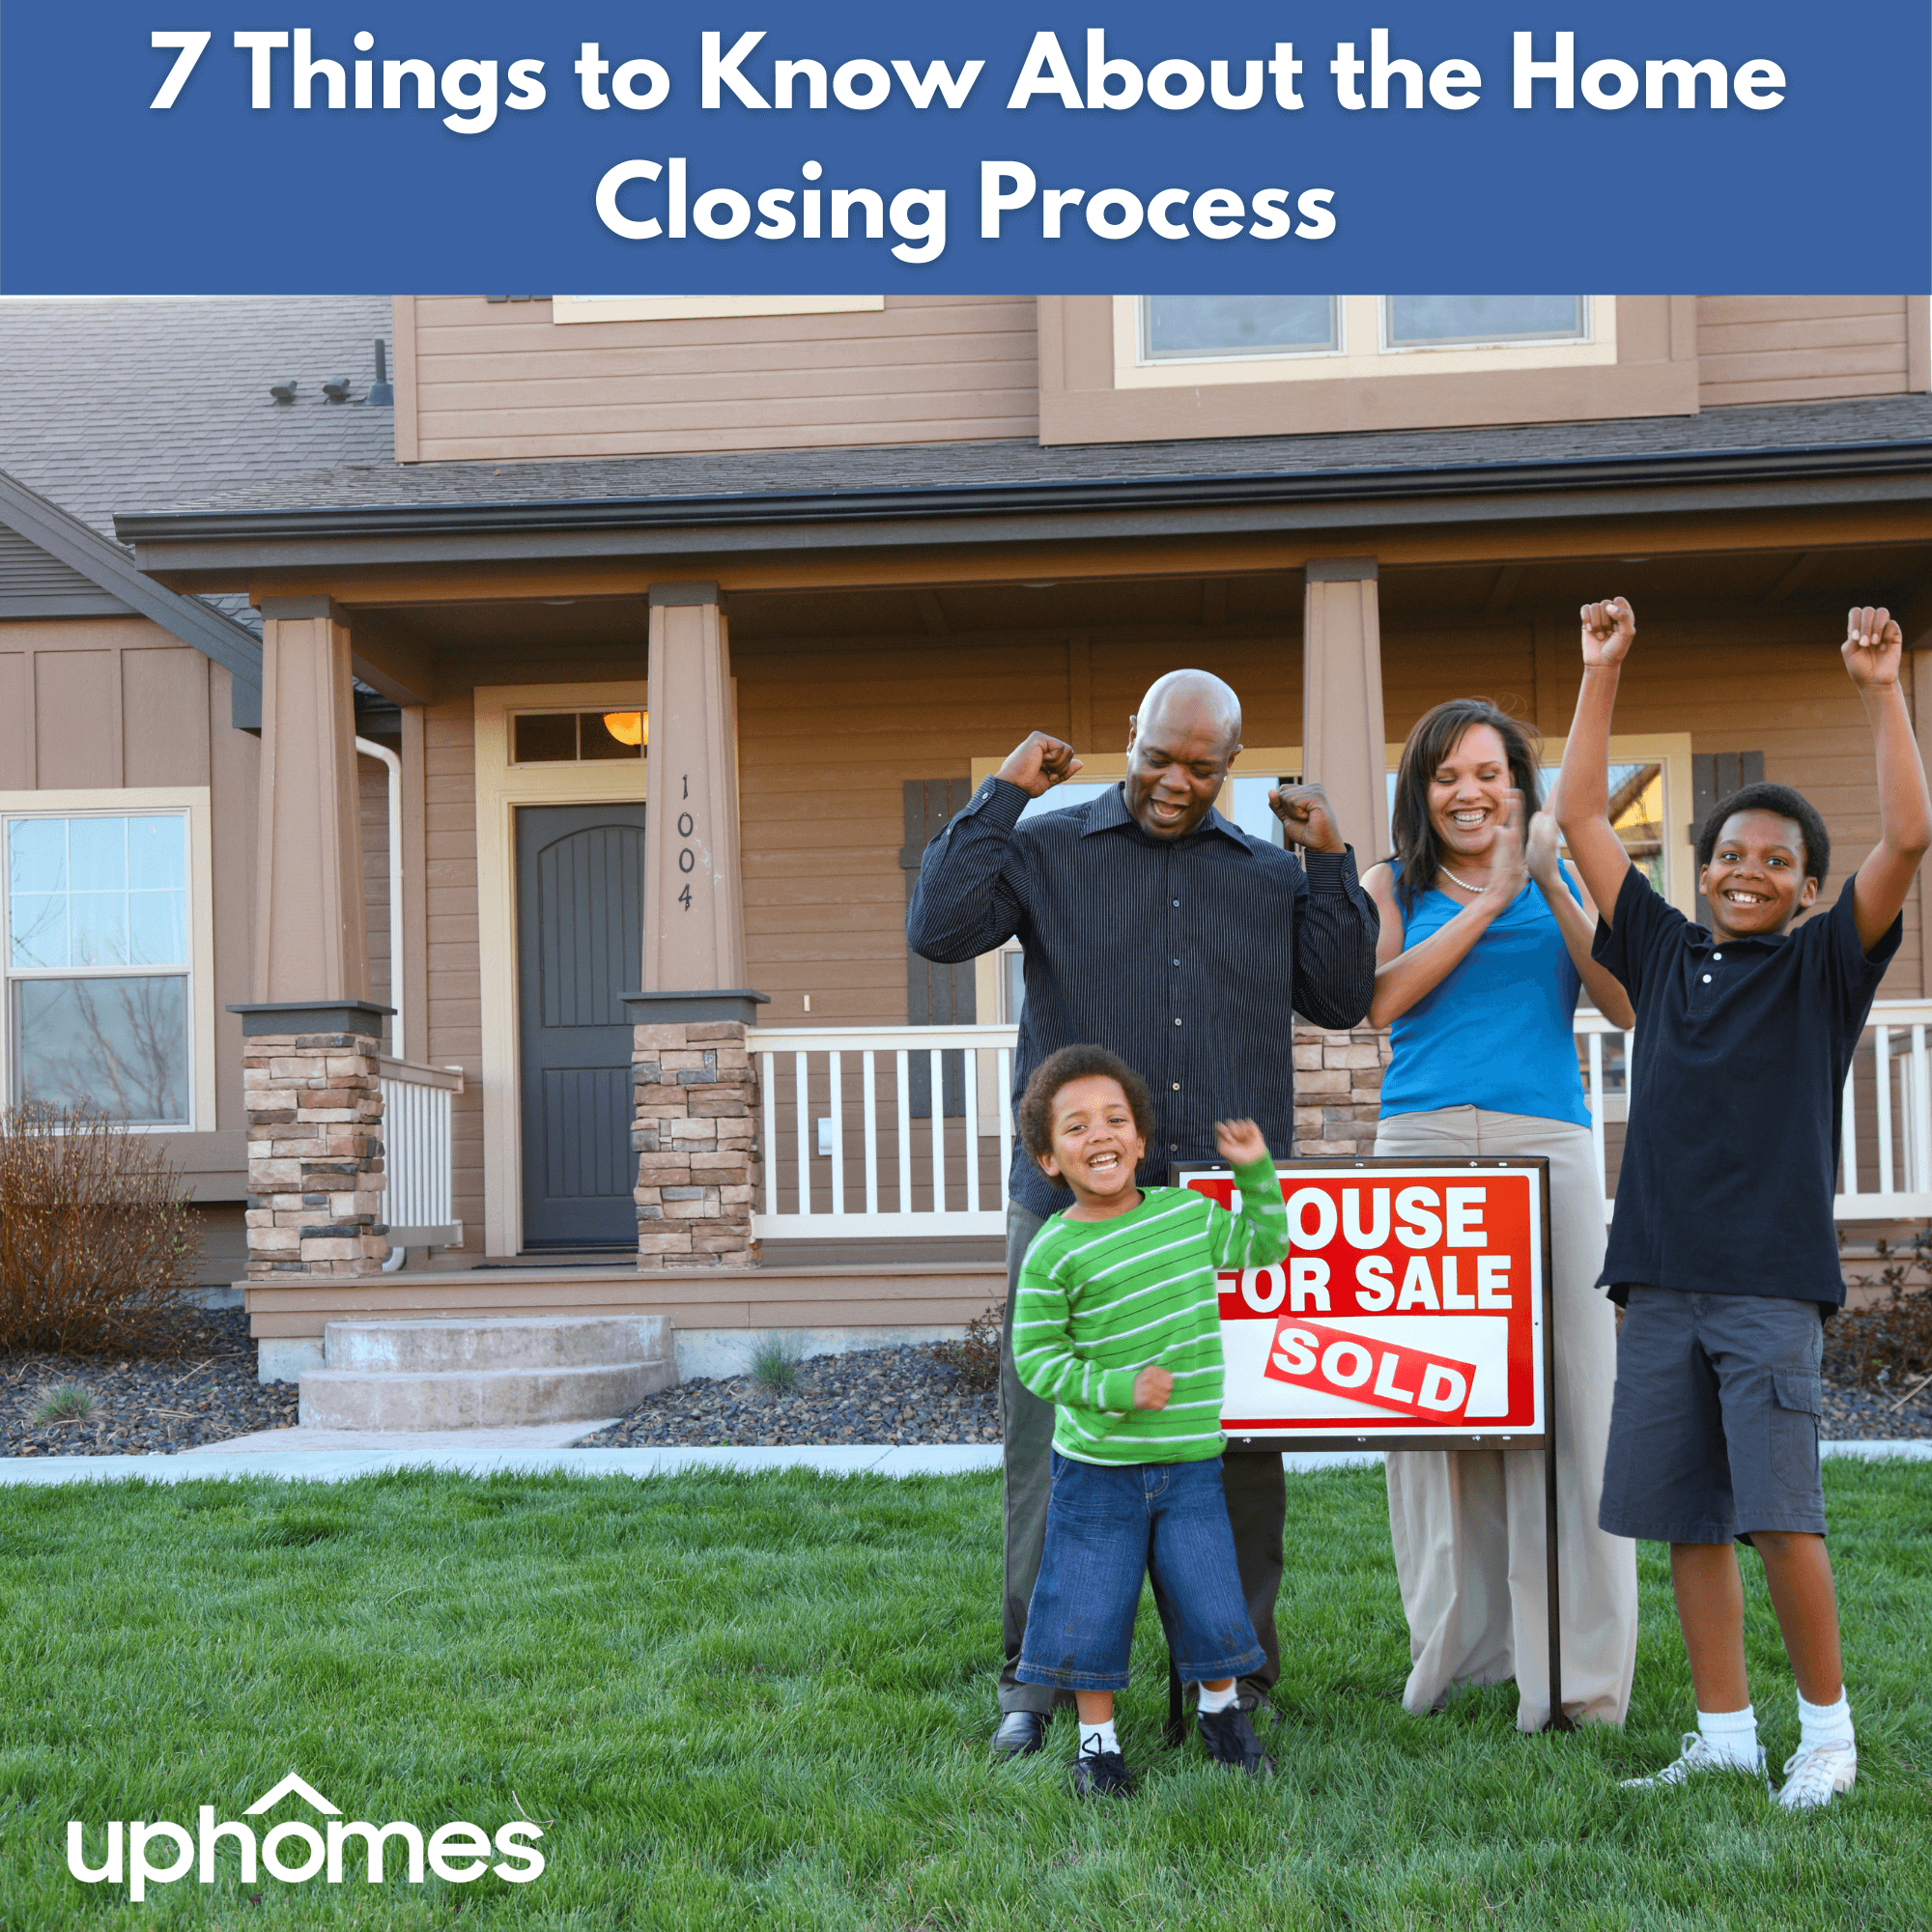 Home Closing Process - Things to know when purchasing and closing on a home